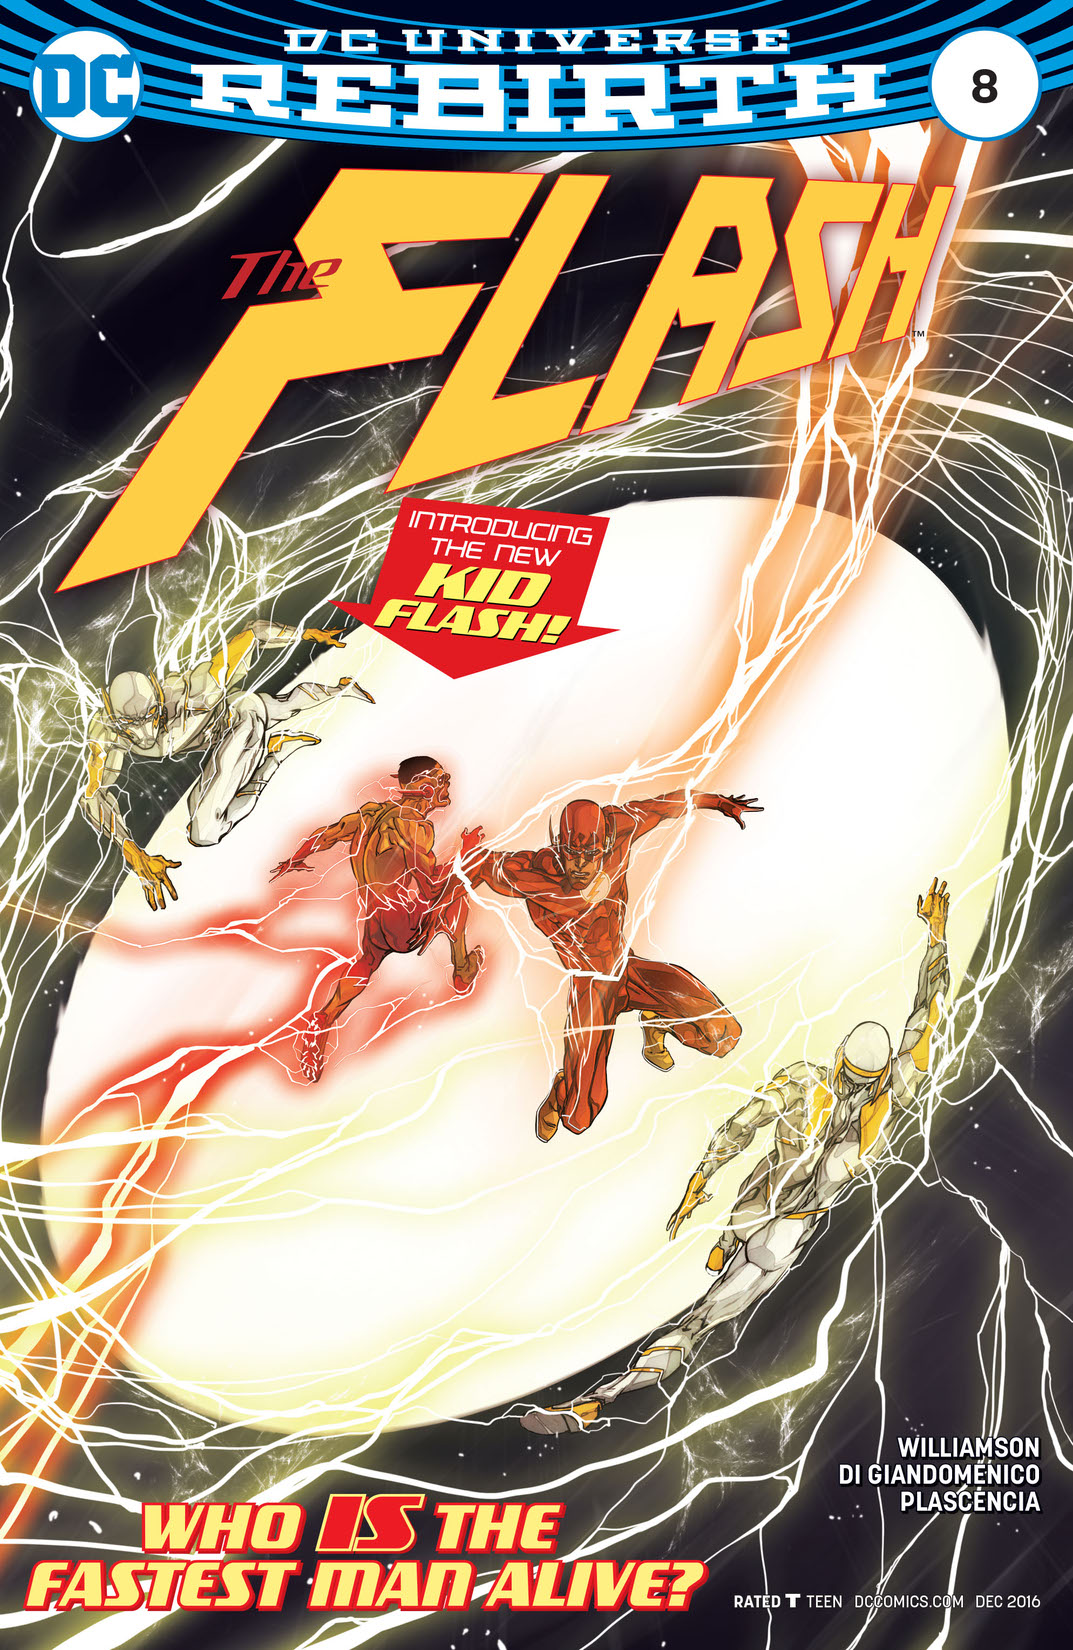 The Flash (2016-) #8 preview images